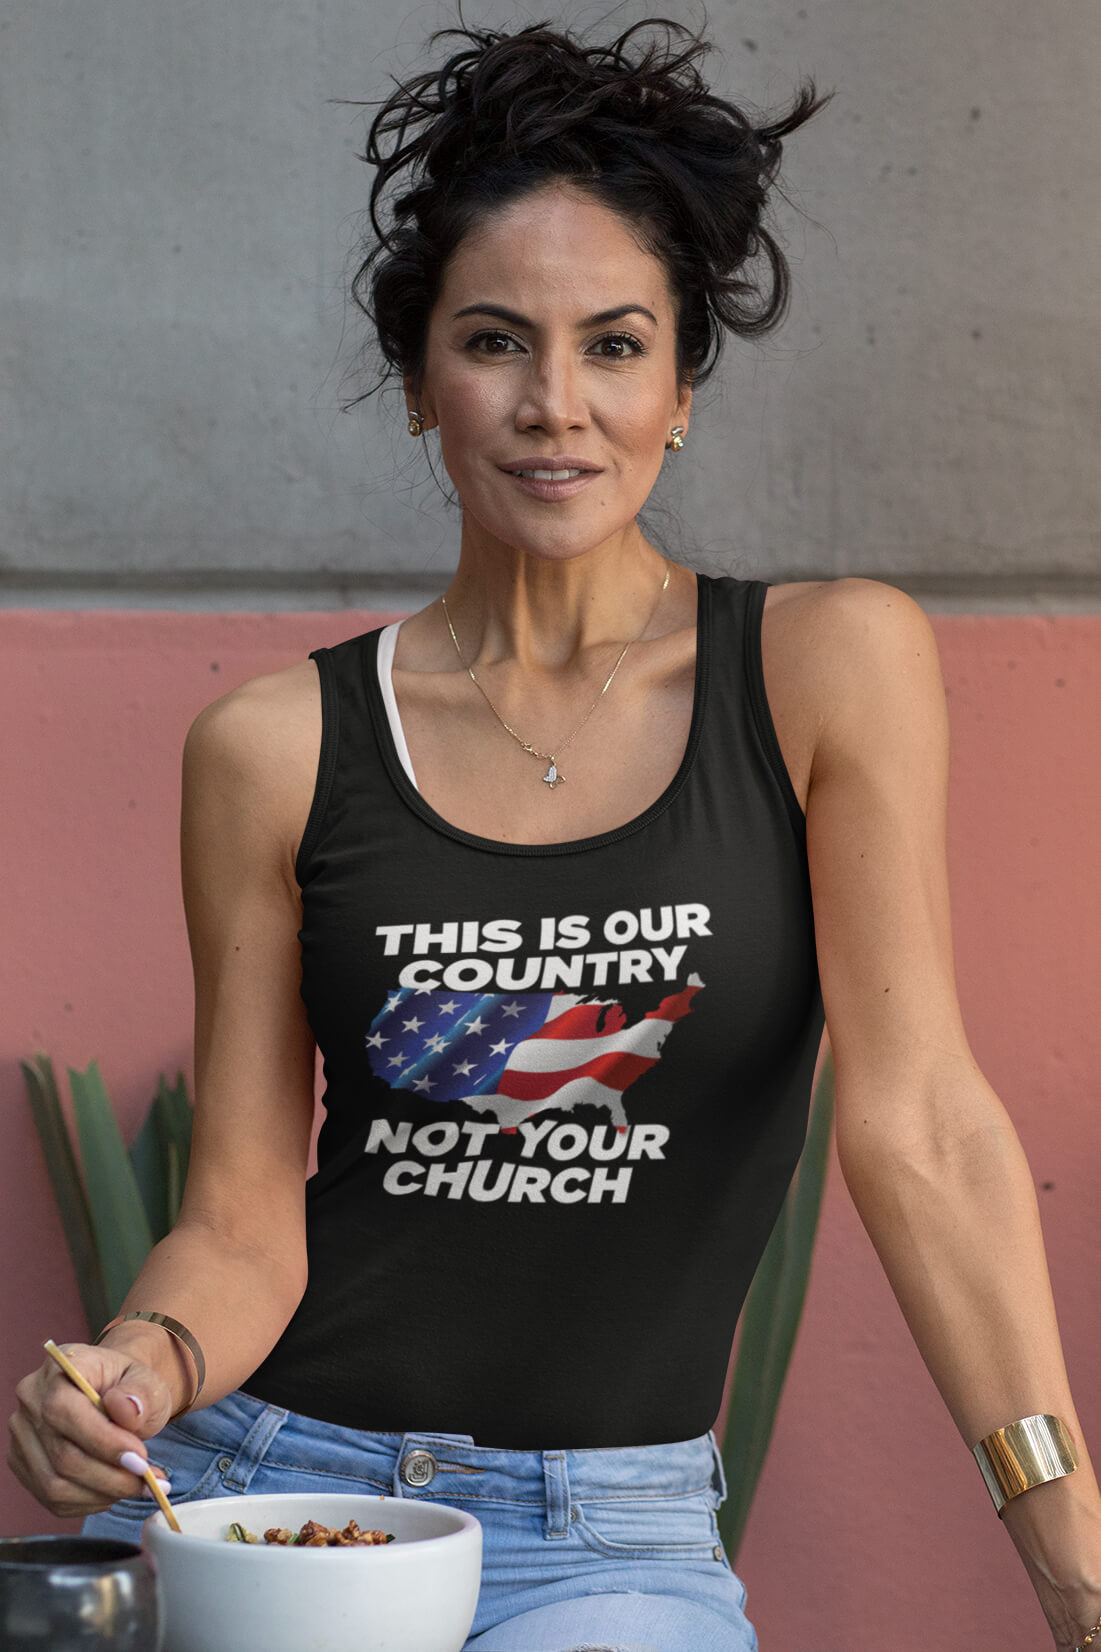 This is Our Country Not Your Church tank top